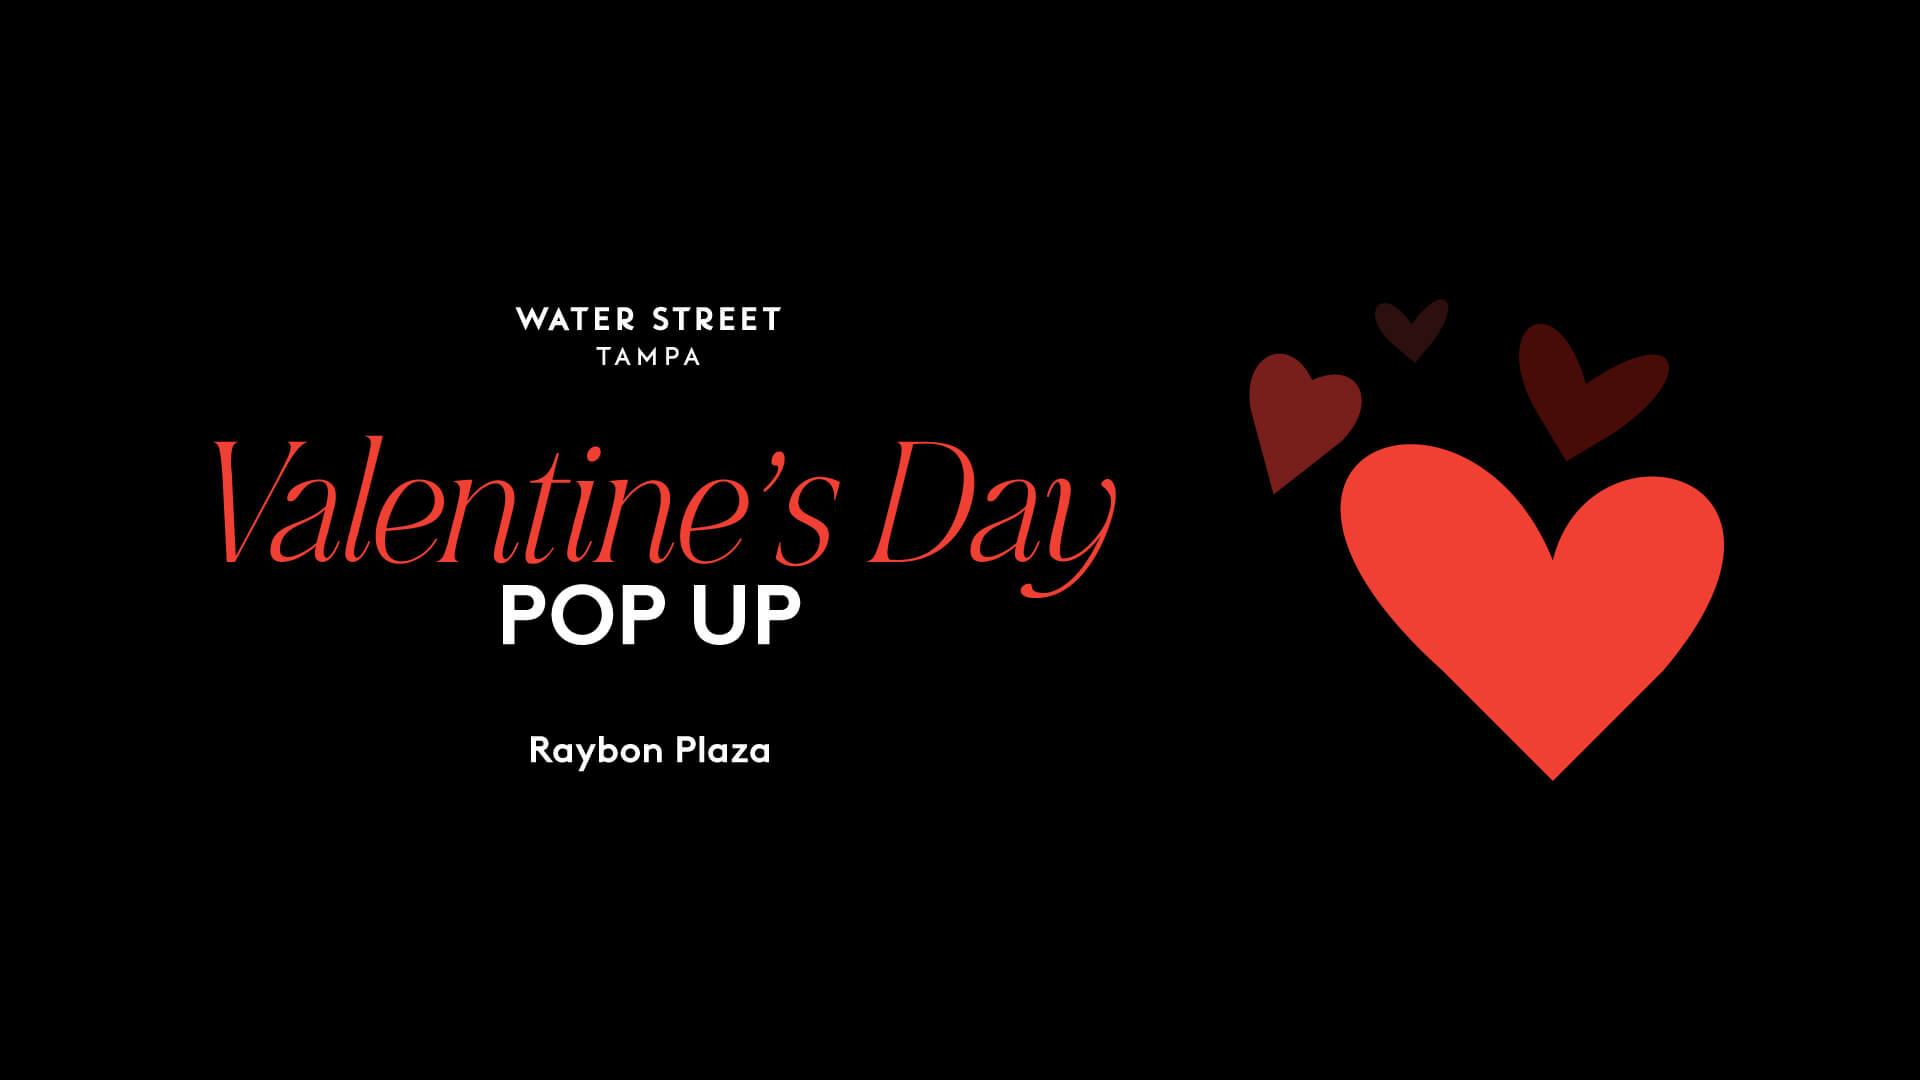 Valentine's Day pop up experience at Water Street Tampa